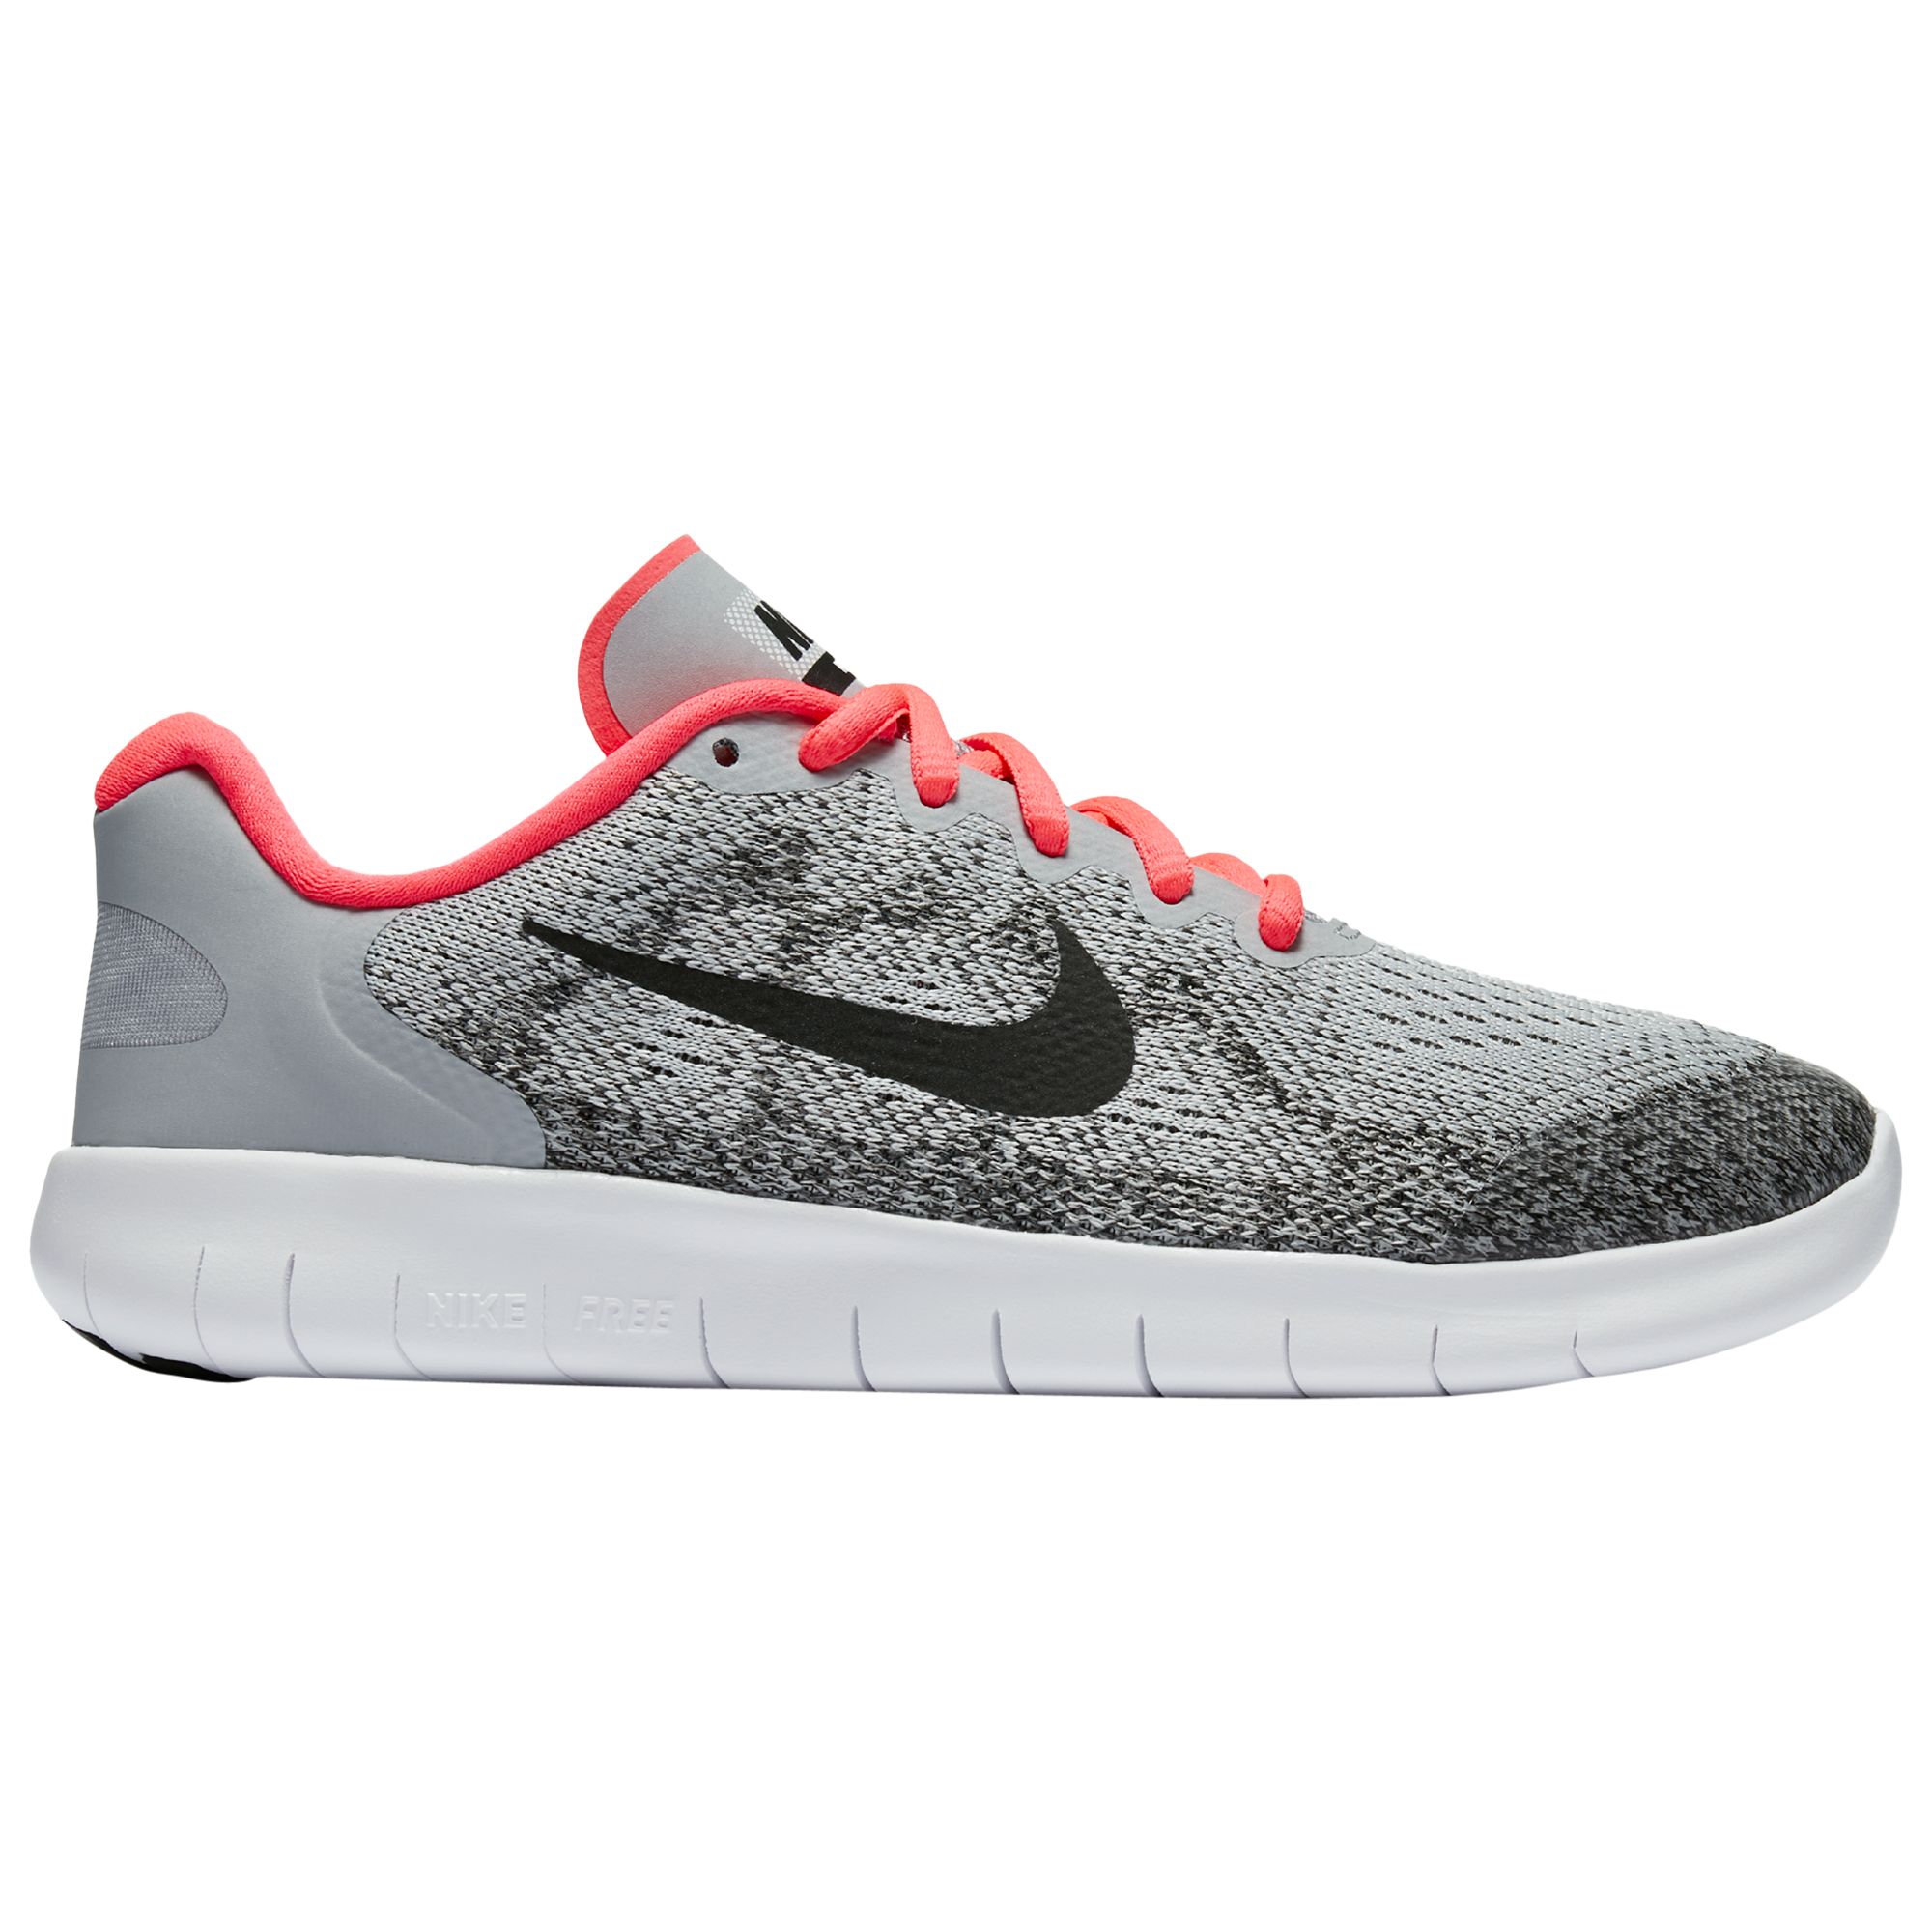 Nike Children's Free Run 2 Lace Up Trainers, Grey/Pink, 5